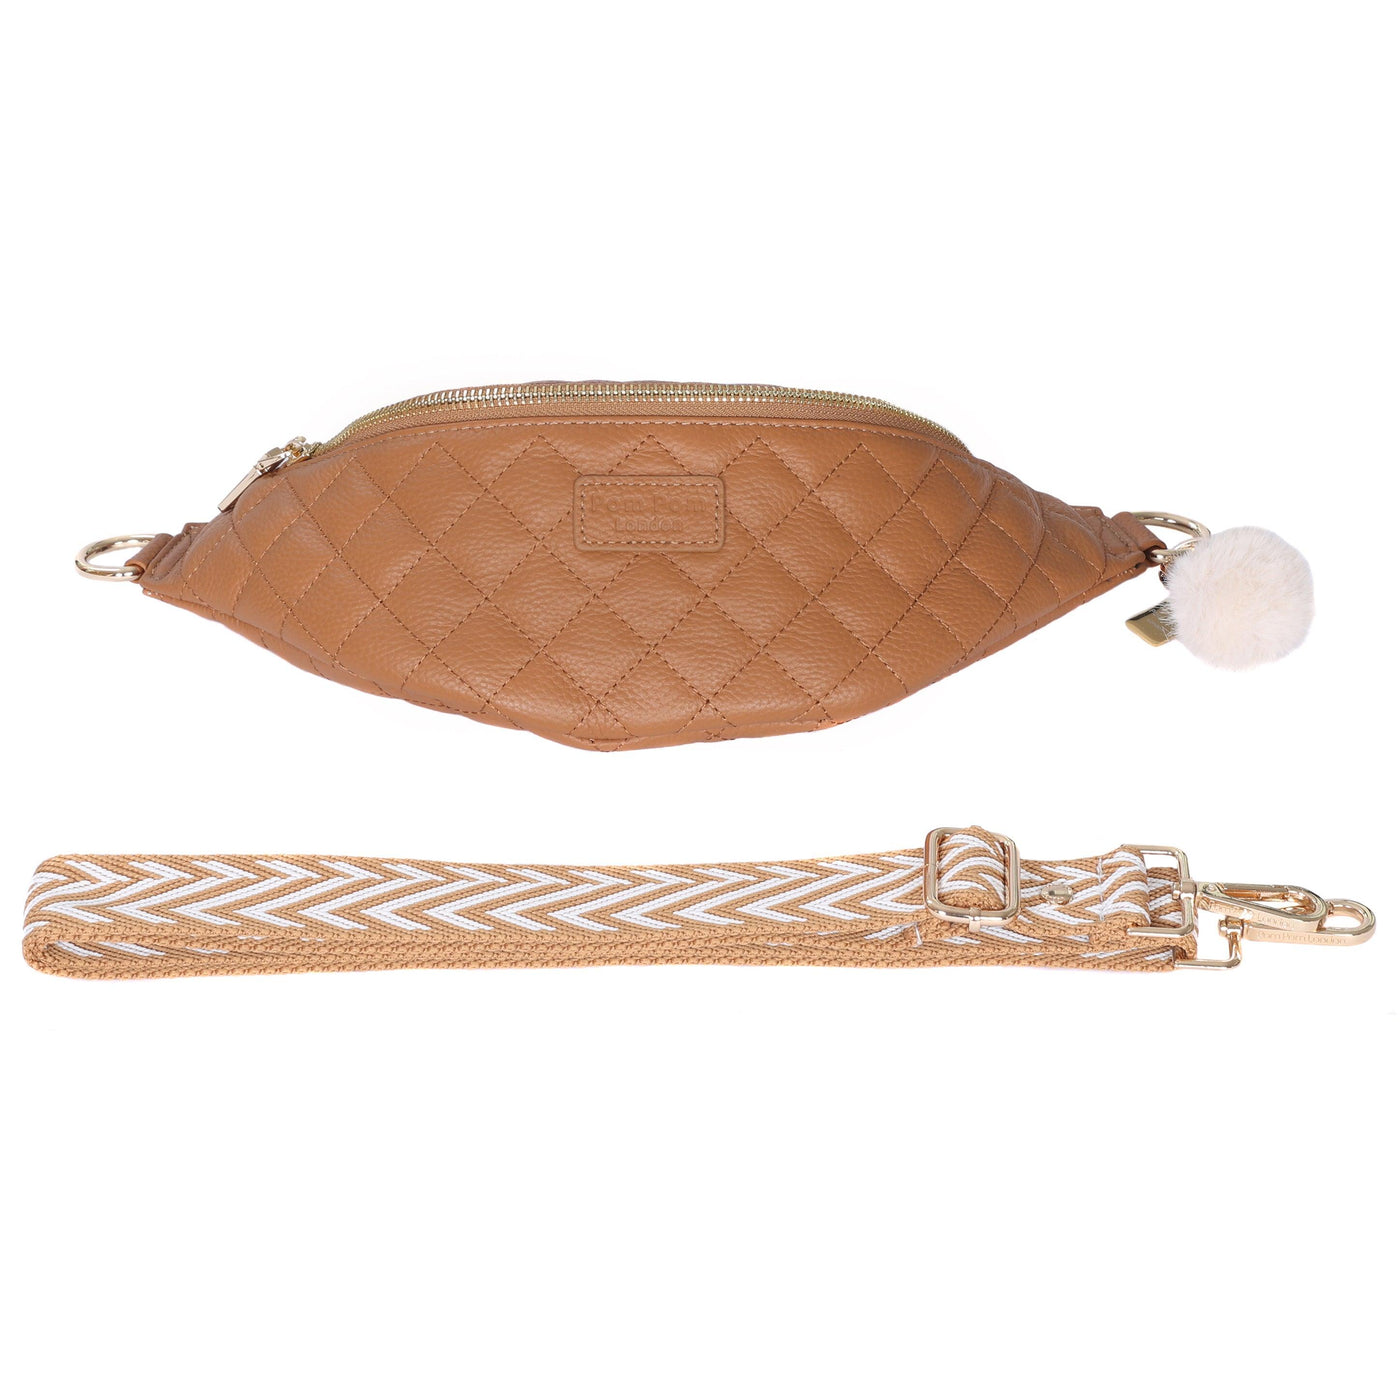 Quilted Bum Bag Maple & Accessories - Pom Pom London